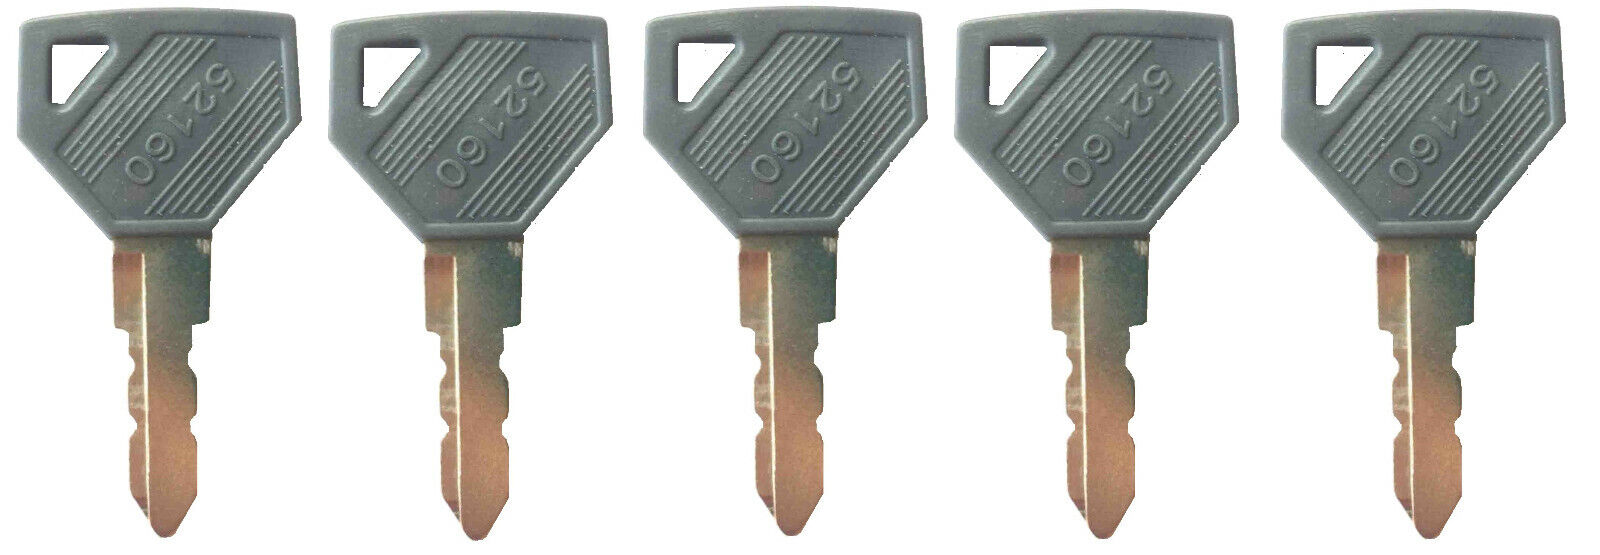 5 Replacement Yanmar and John Deere Models Tractor Ignition Keys 198360-52160